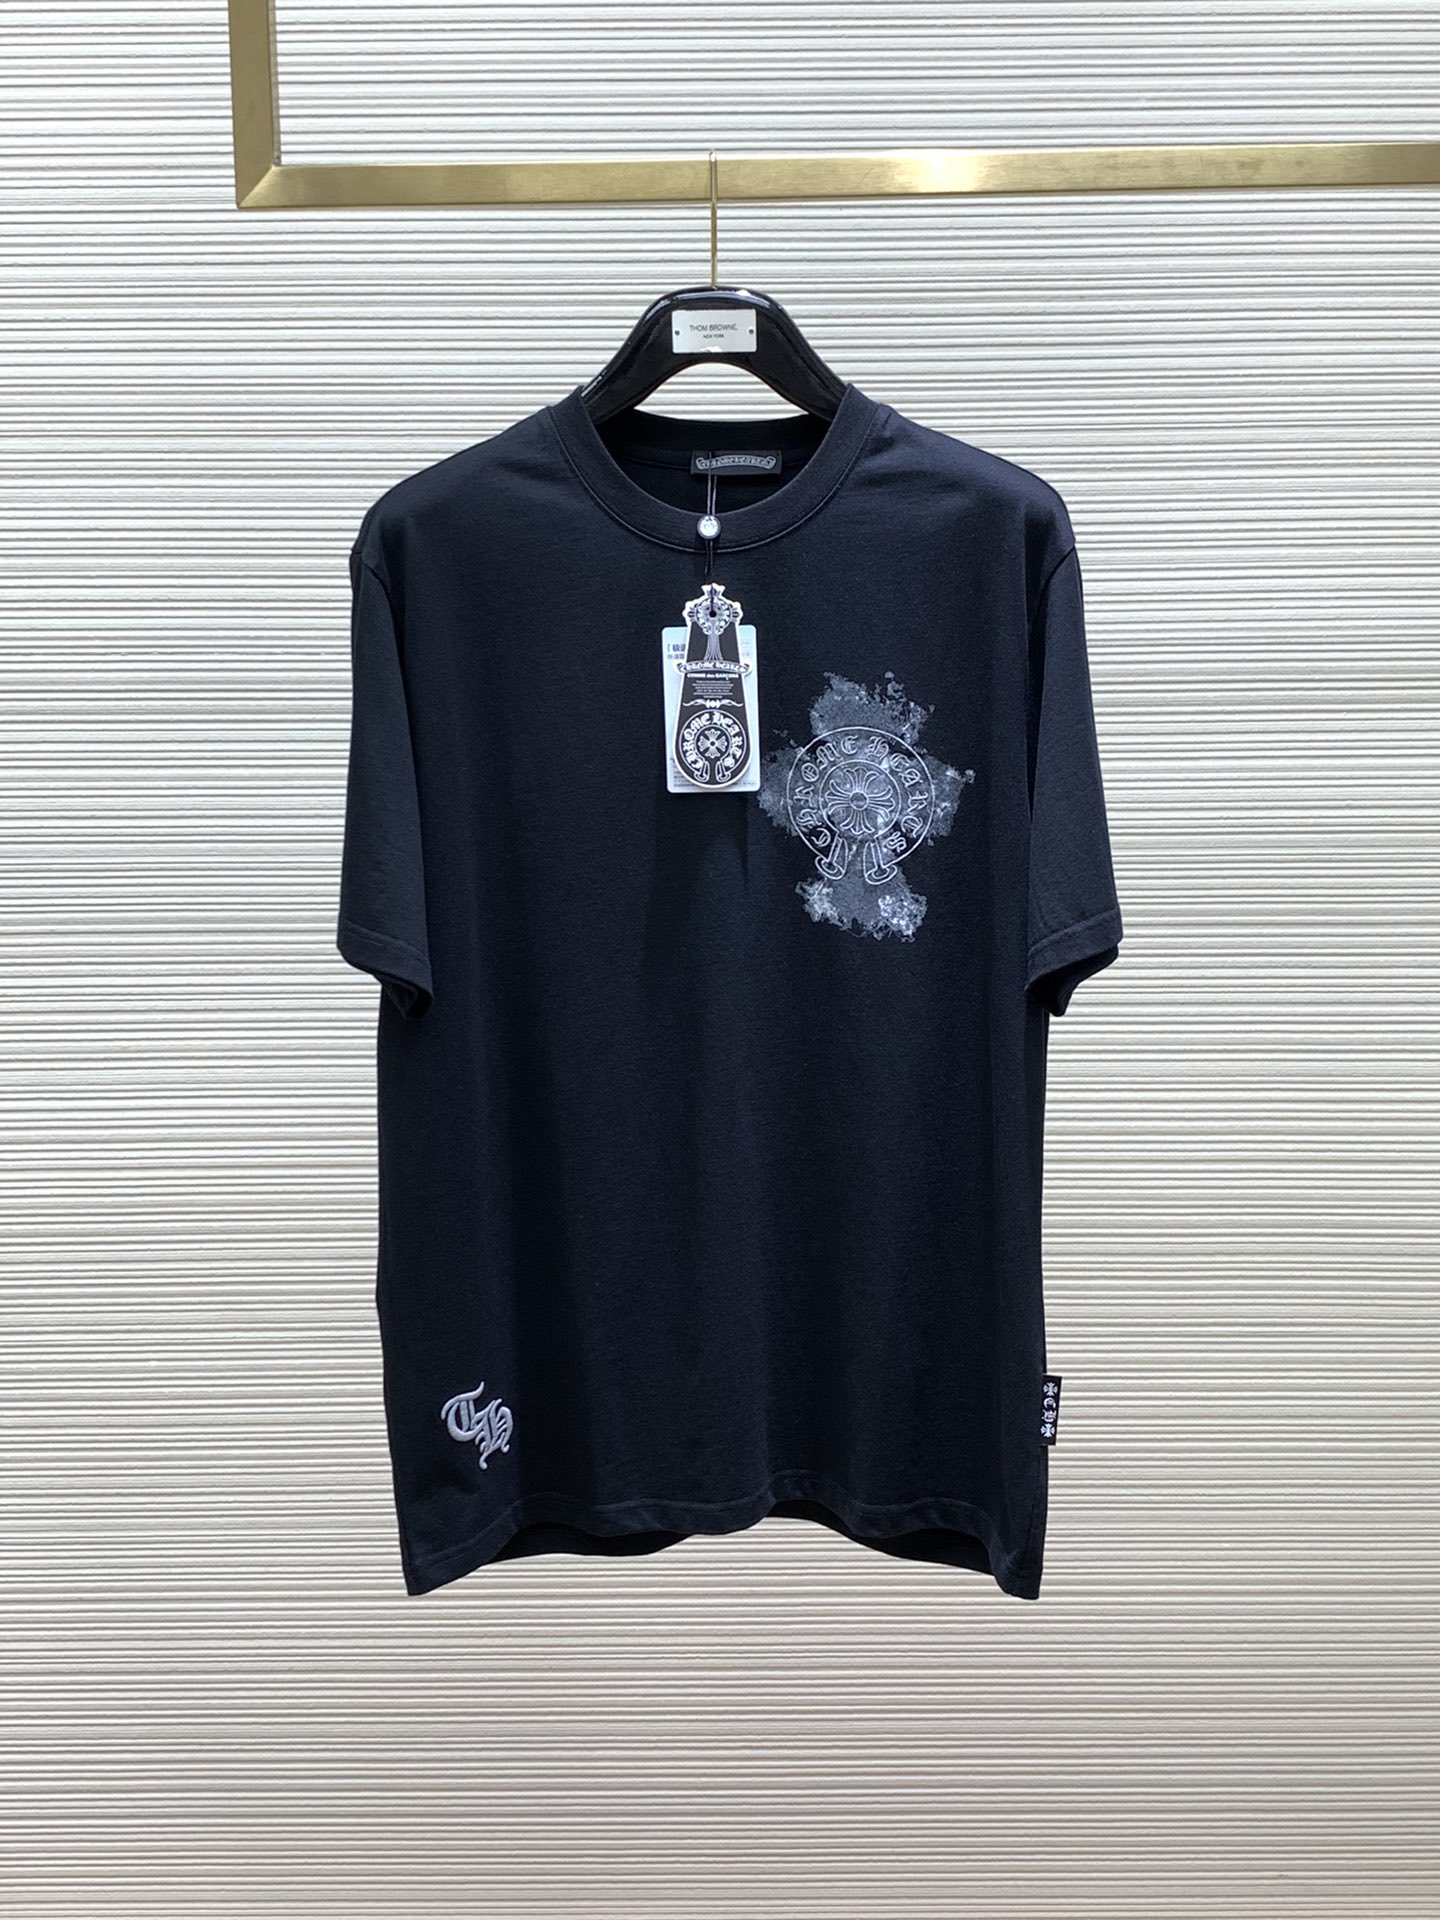 Chrome Hearts 1:1
 Clothing T-Shirt Embroidery Summer Collection Fashion Short Sleeve